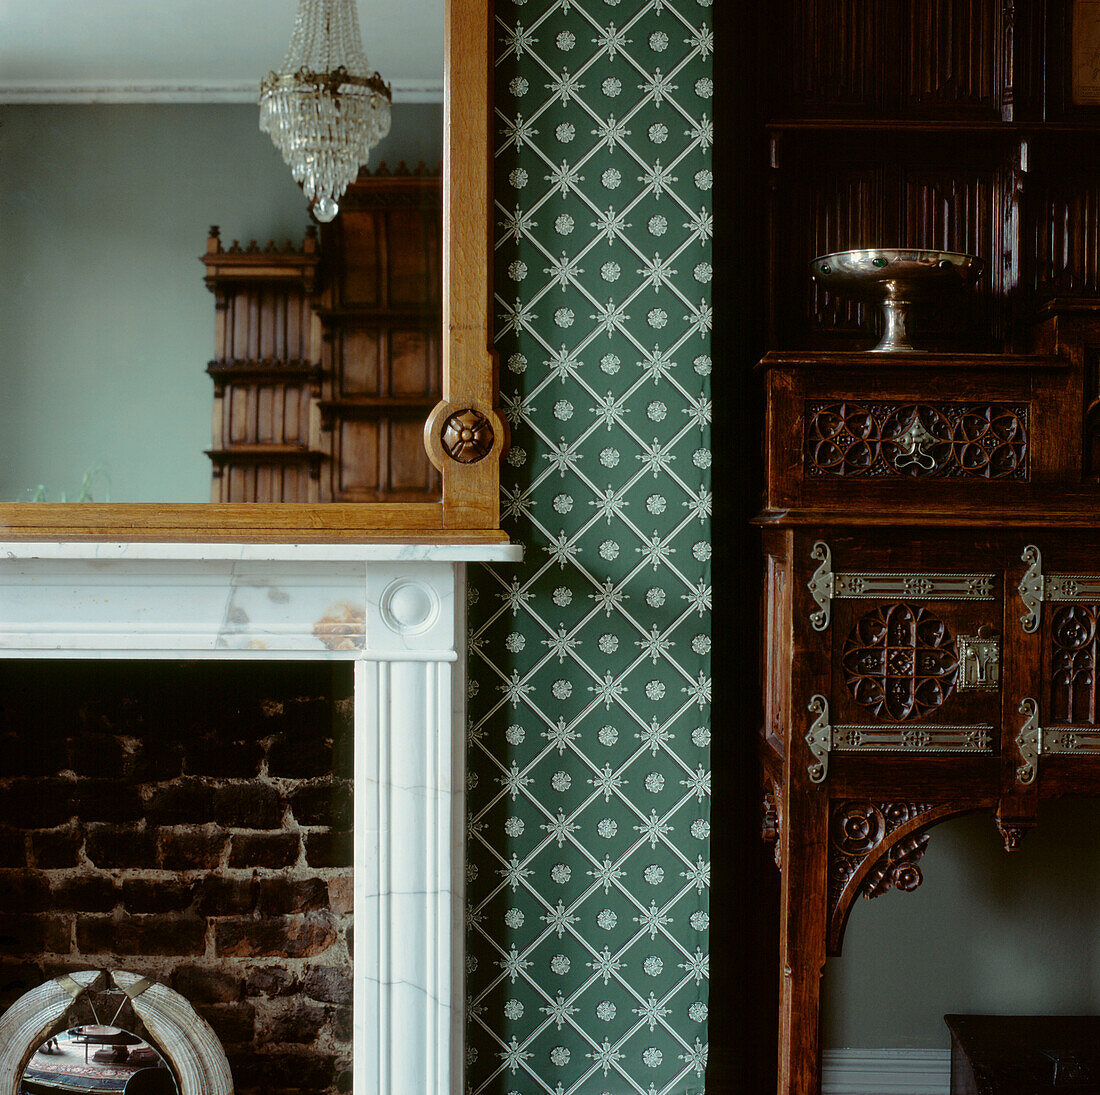 Detail of wallpapered chimney breast with fireplace and mirror